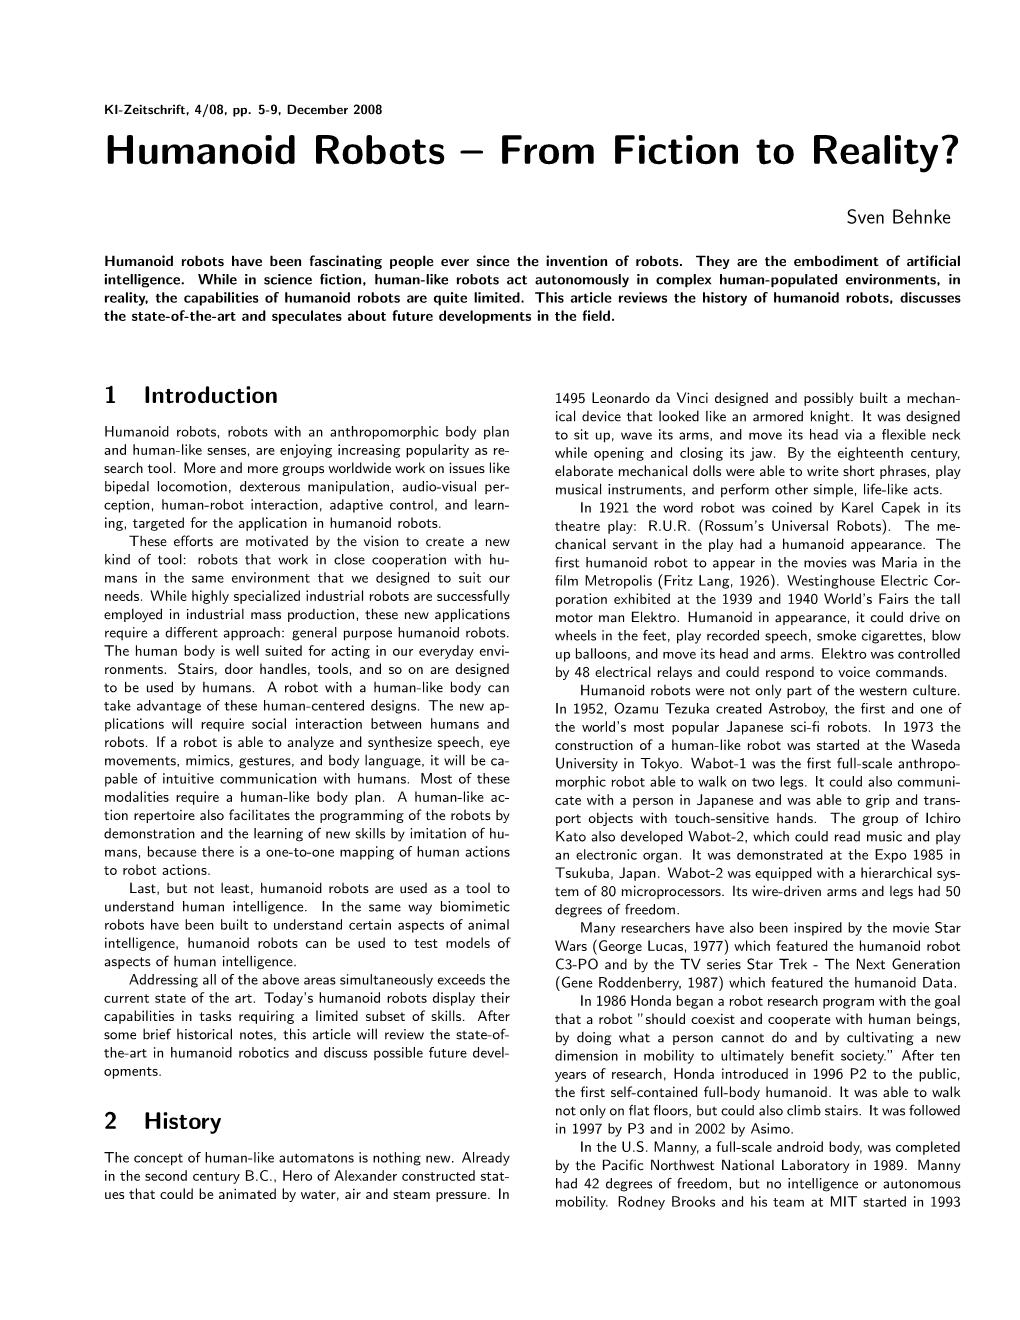 Humanoid Robots – from Fiction to Reality?